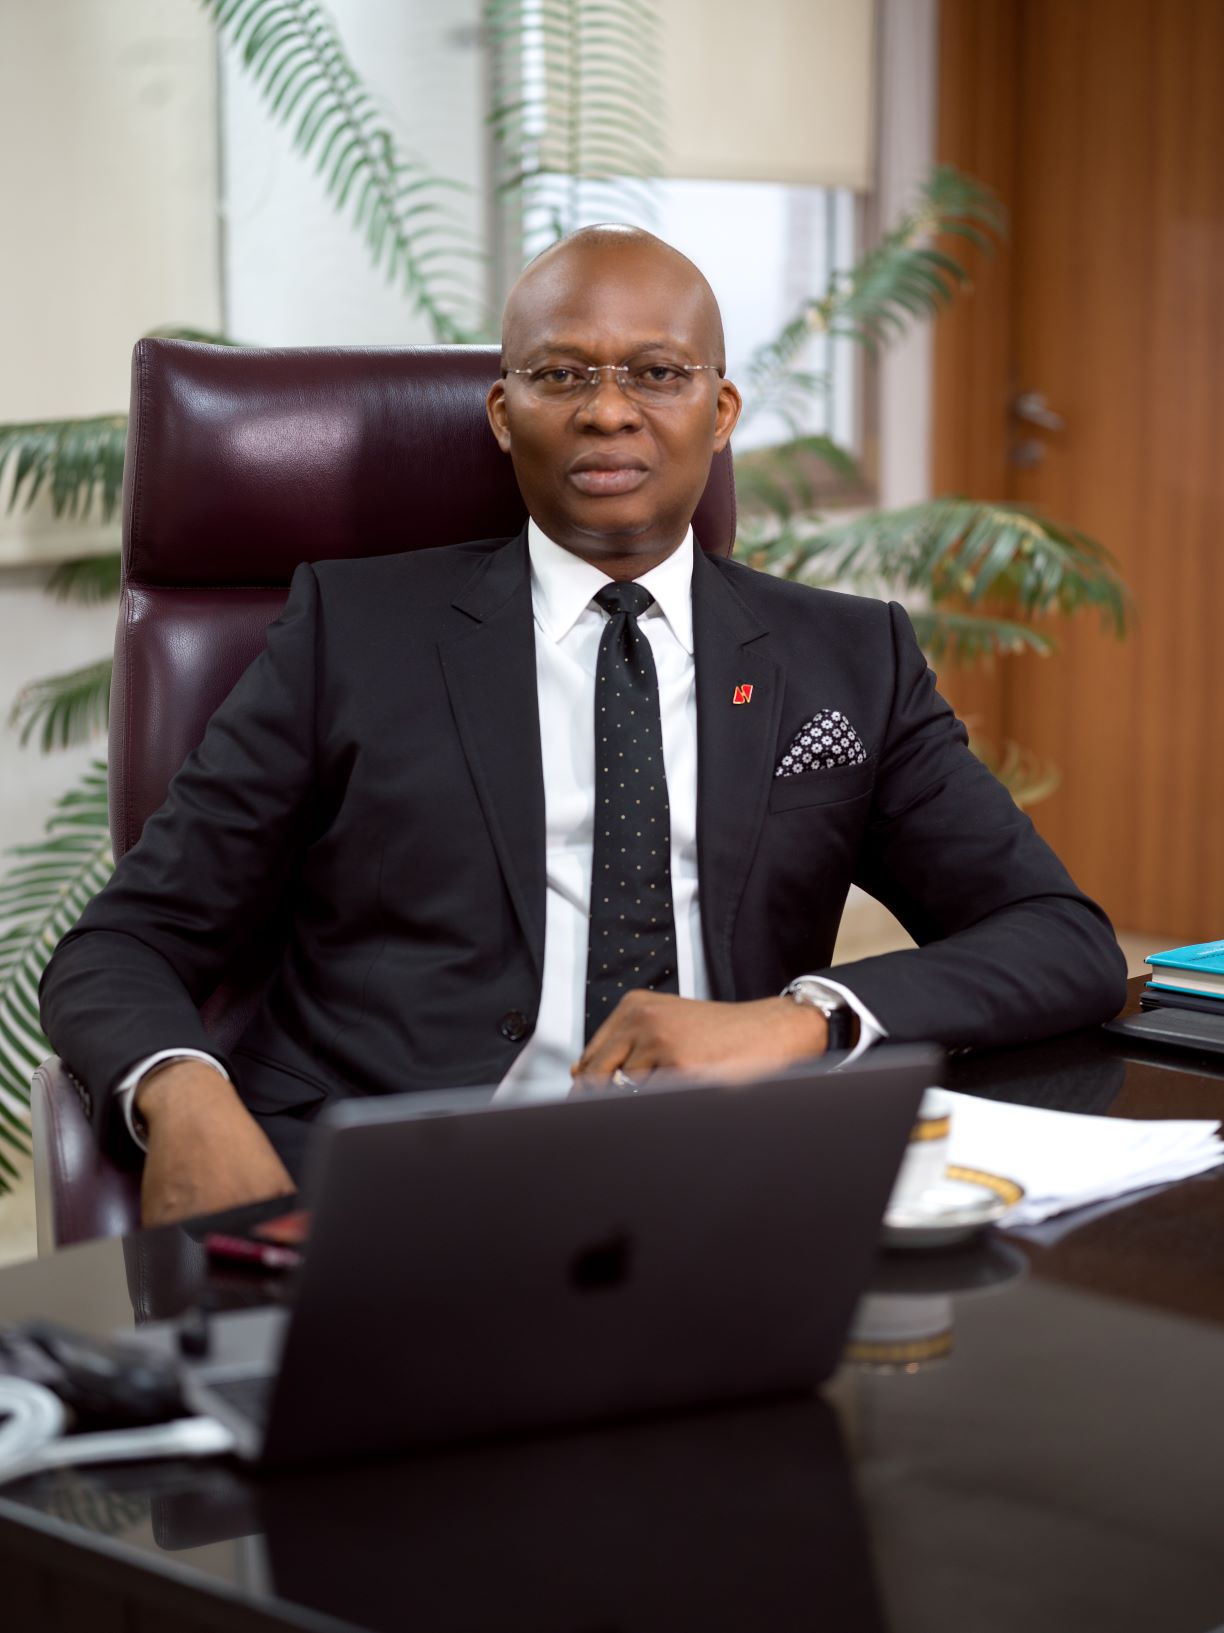 Commitment to customer service translates to financial gains –UBA GMD